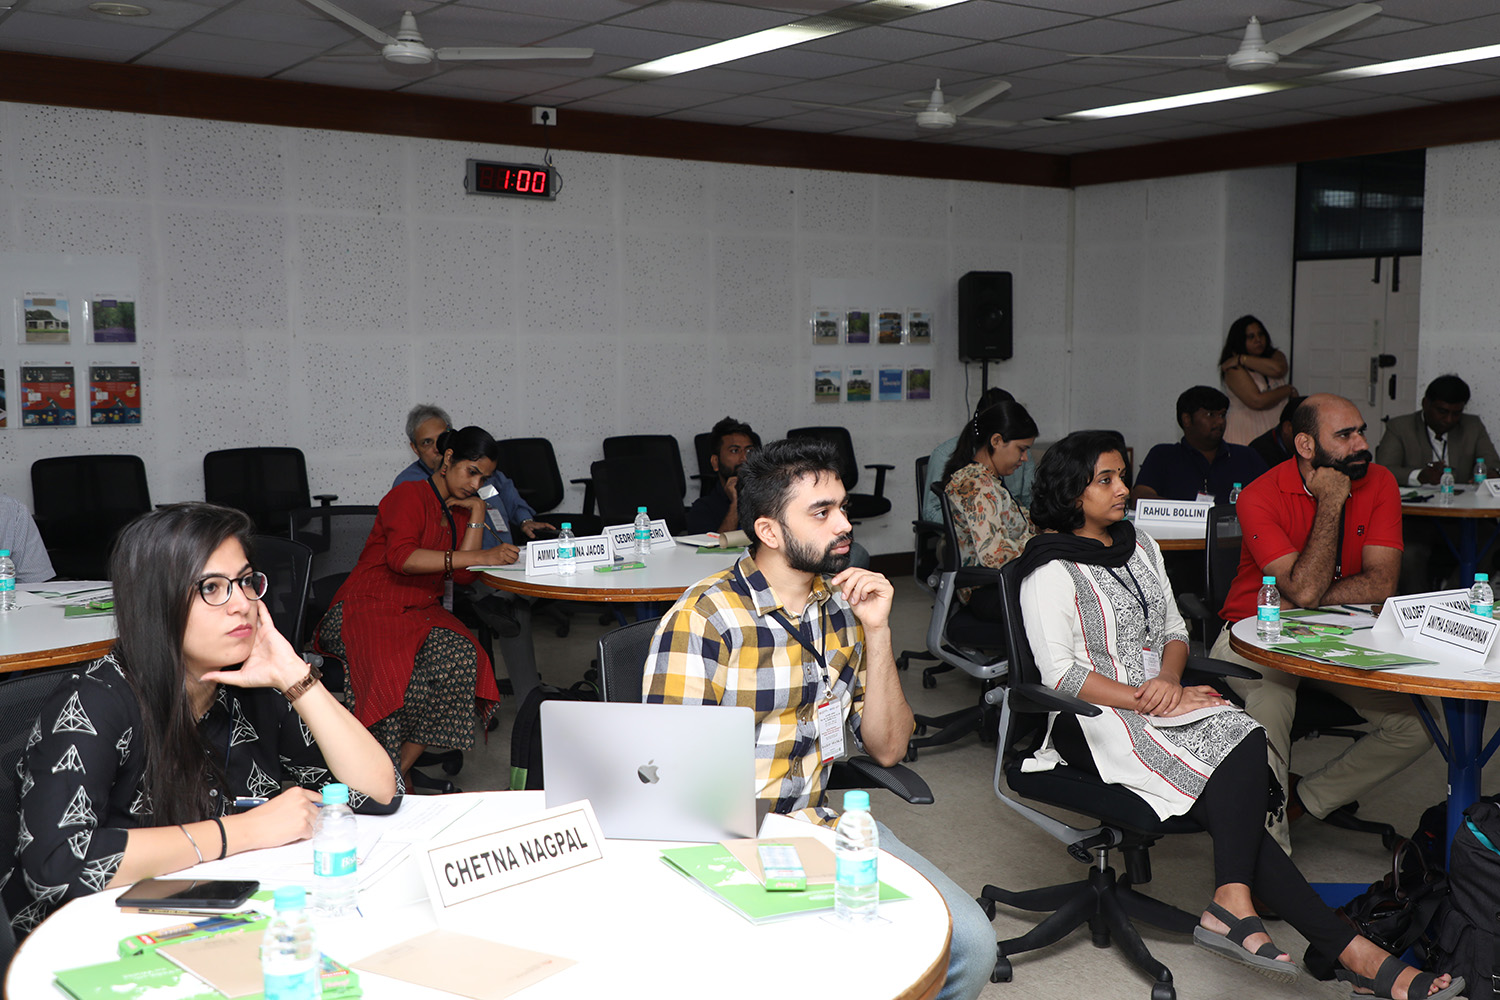 A snapshot of the Participants at the workshop.